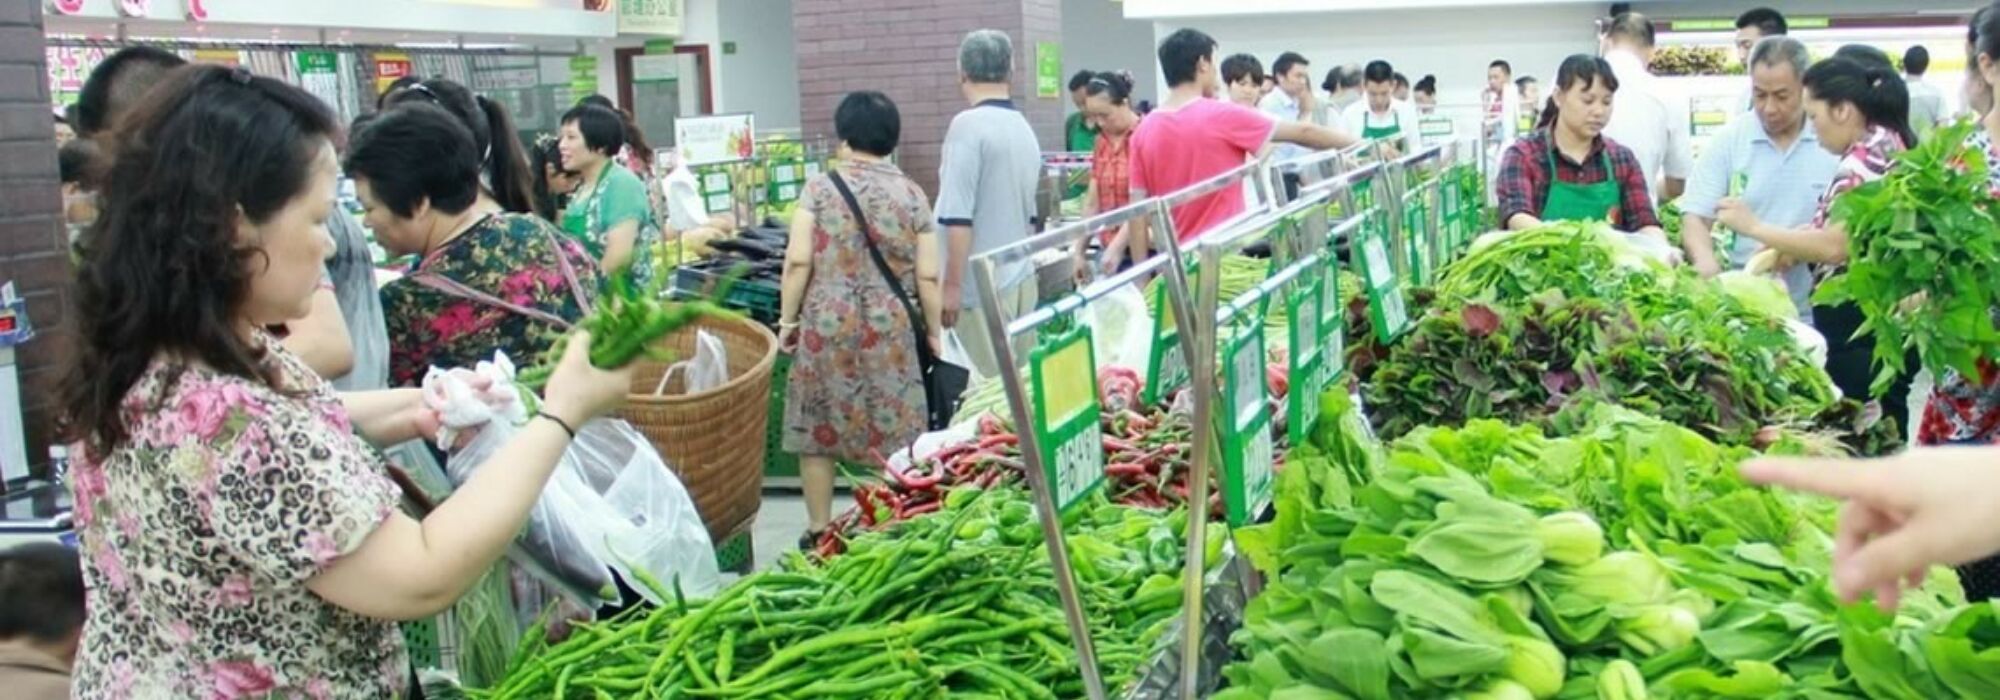 A bunch of shoppers around an open-air market look over fresh vegetables.